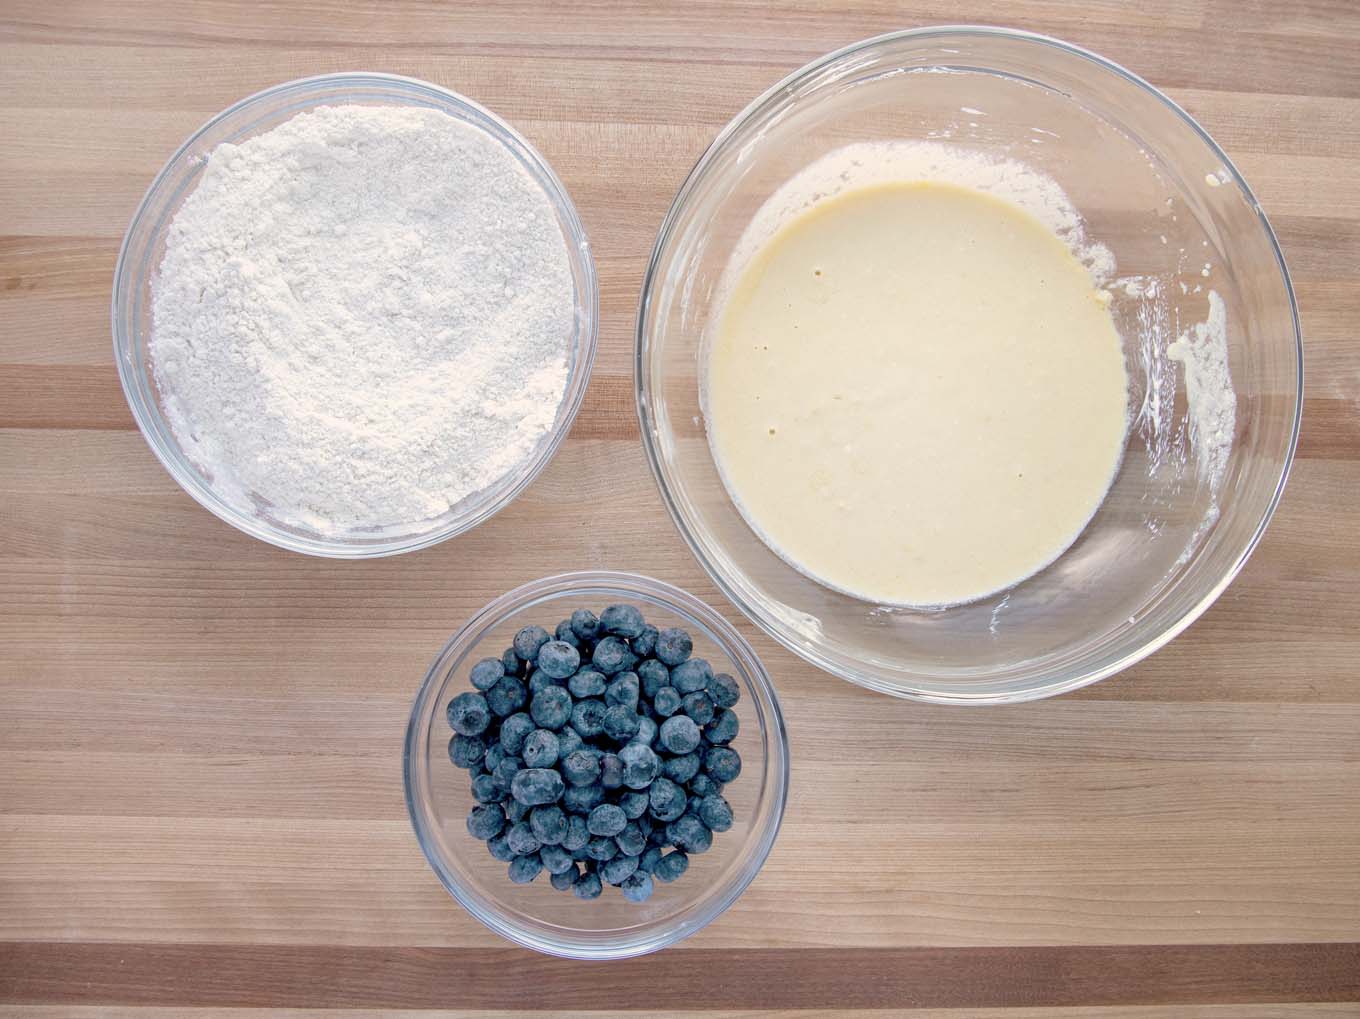 Glass mixing bowls with the flour mixture, egg mixture and blueberries on a wooden cutting board